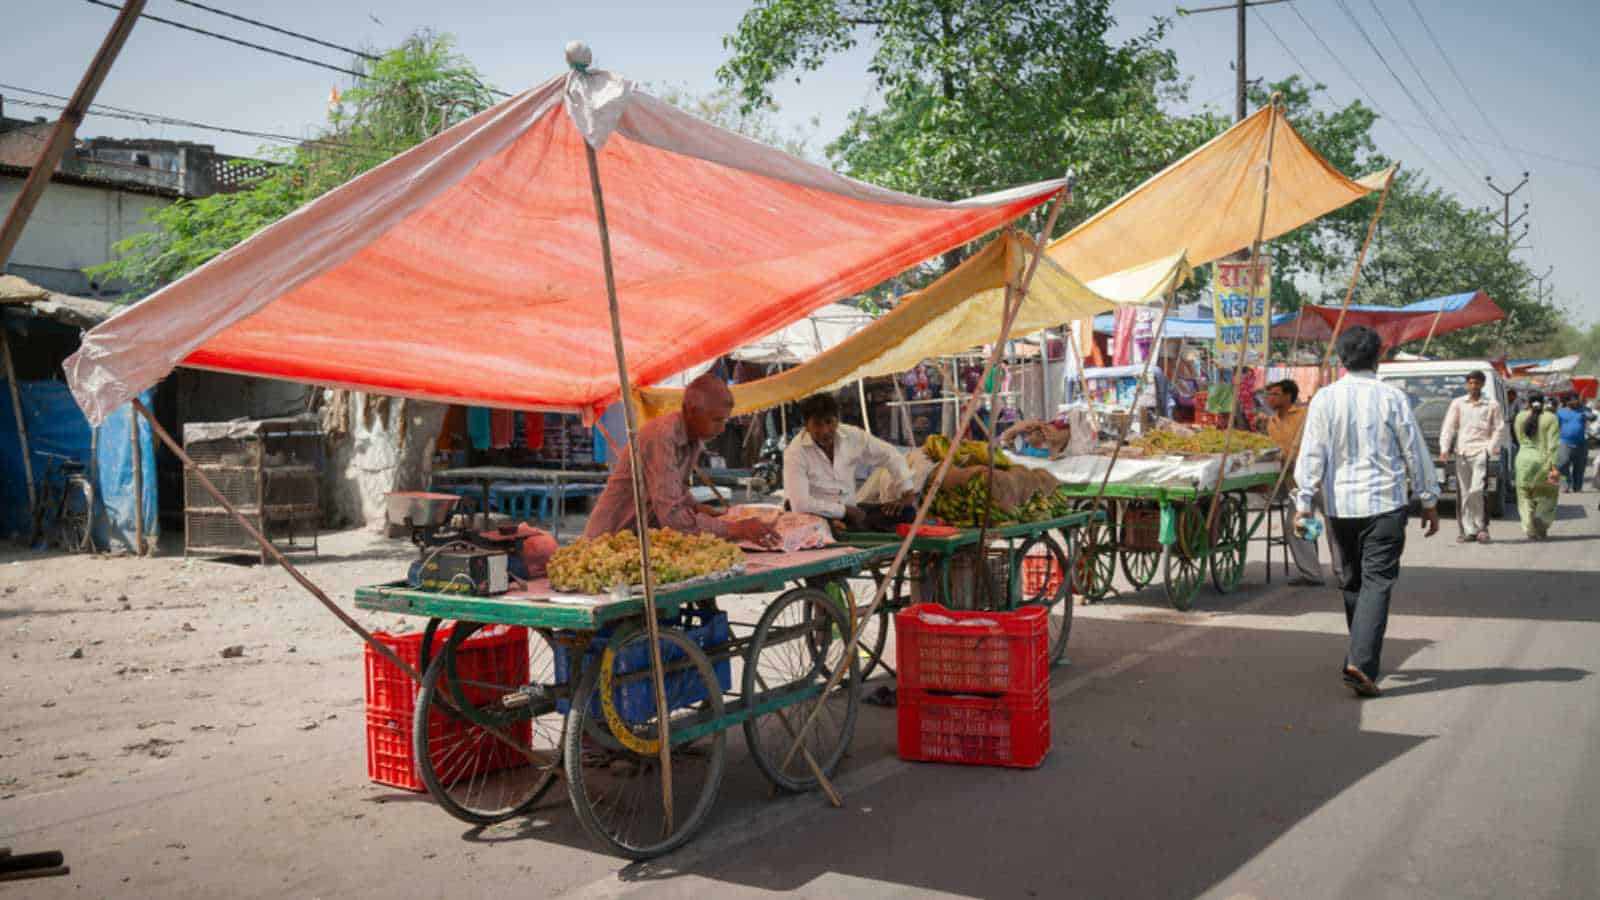 Kanpur, Uttar Pradesh / India - Mar 23 2012: Concept of rural business. Street Fruit Market in the rural area of India.